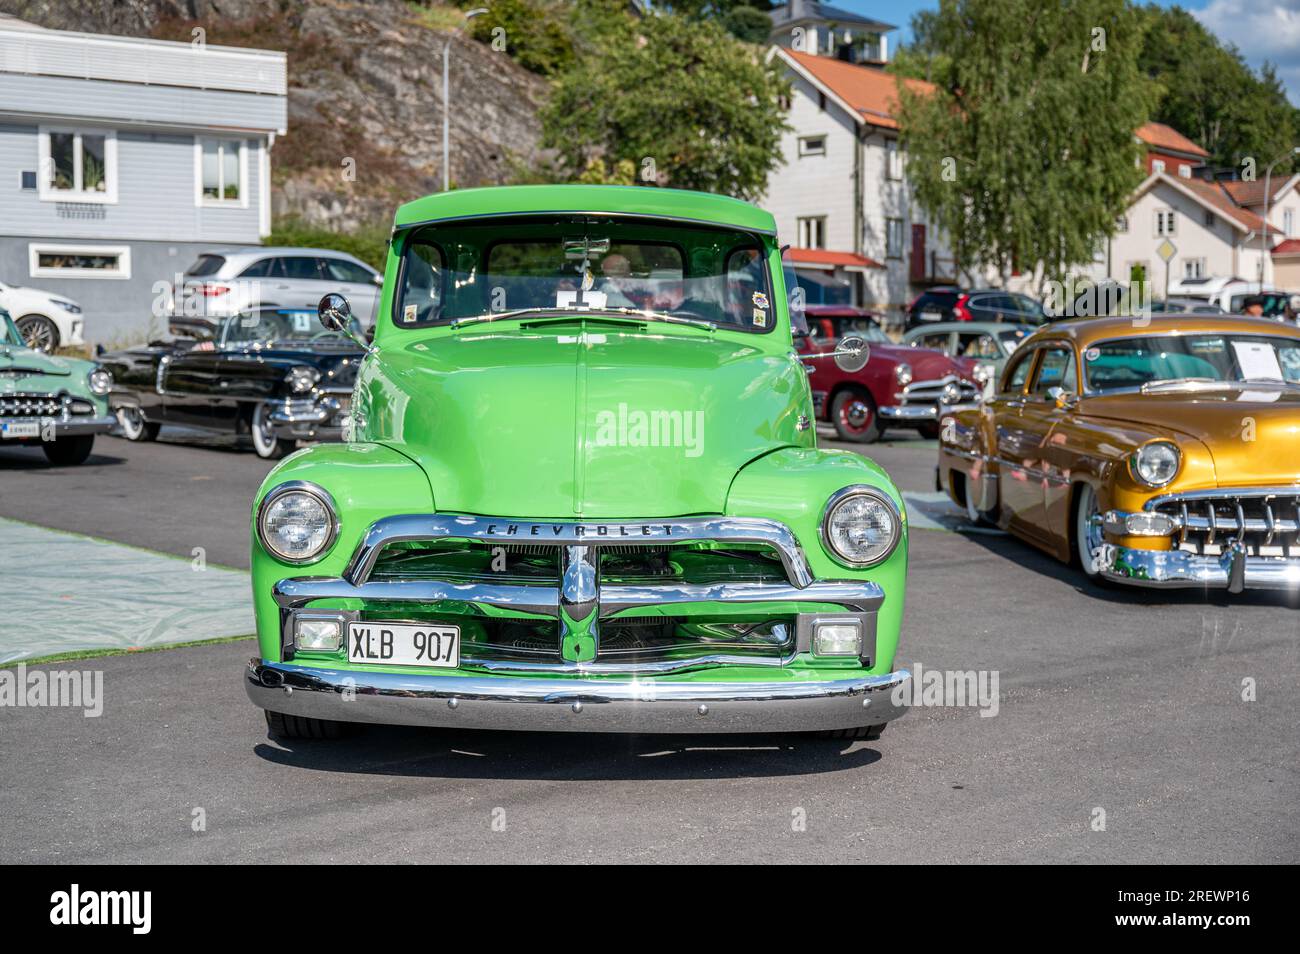 Chevrolet Pick-Up 3100 from 1954 at the Classic festival held July 28-29, 2023 in Swedish Baltic Sea town Valdemarsvik displays vintage vehicles Stock Photo